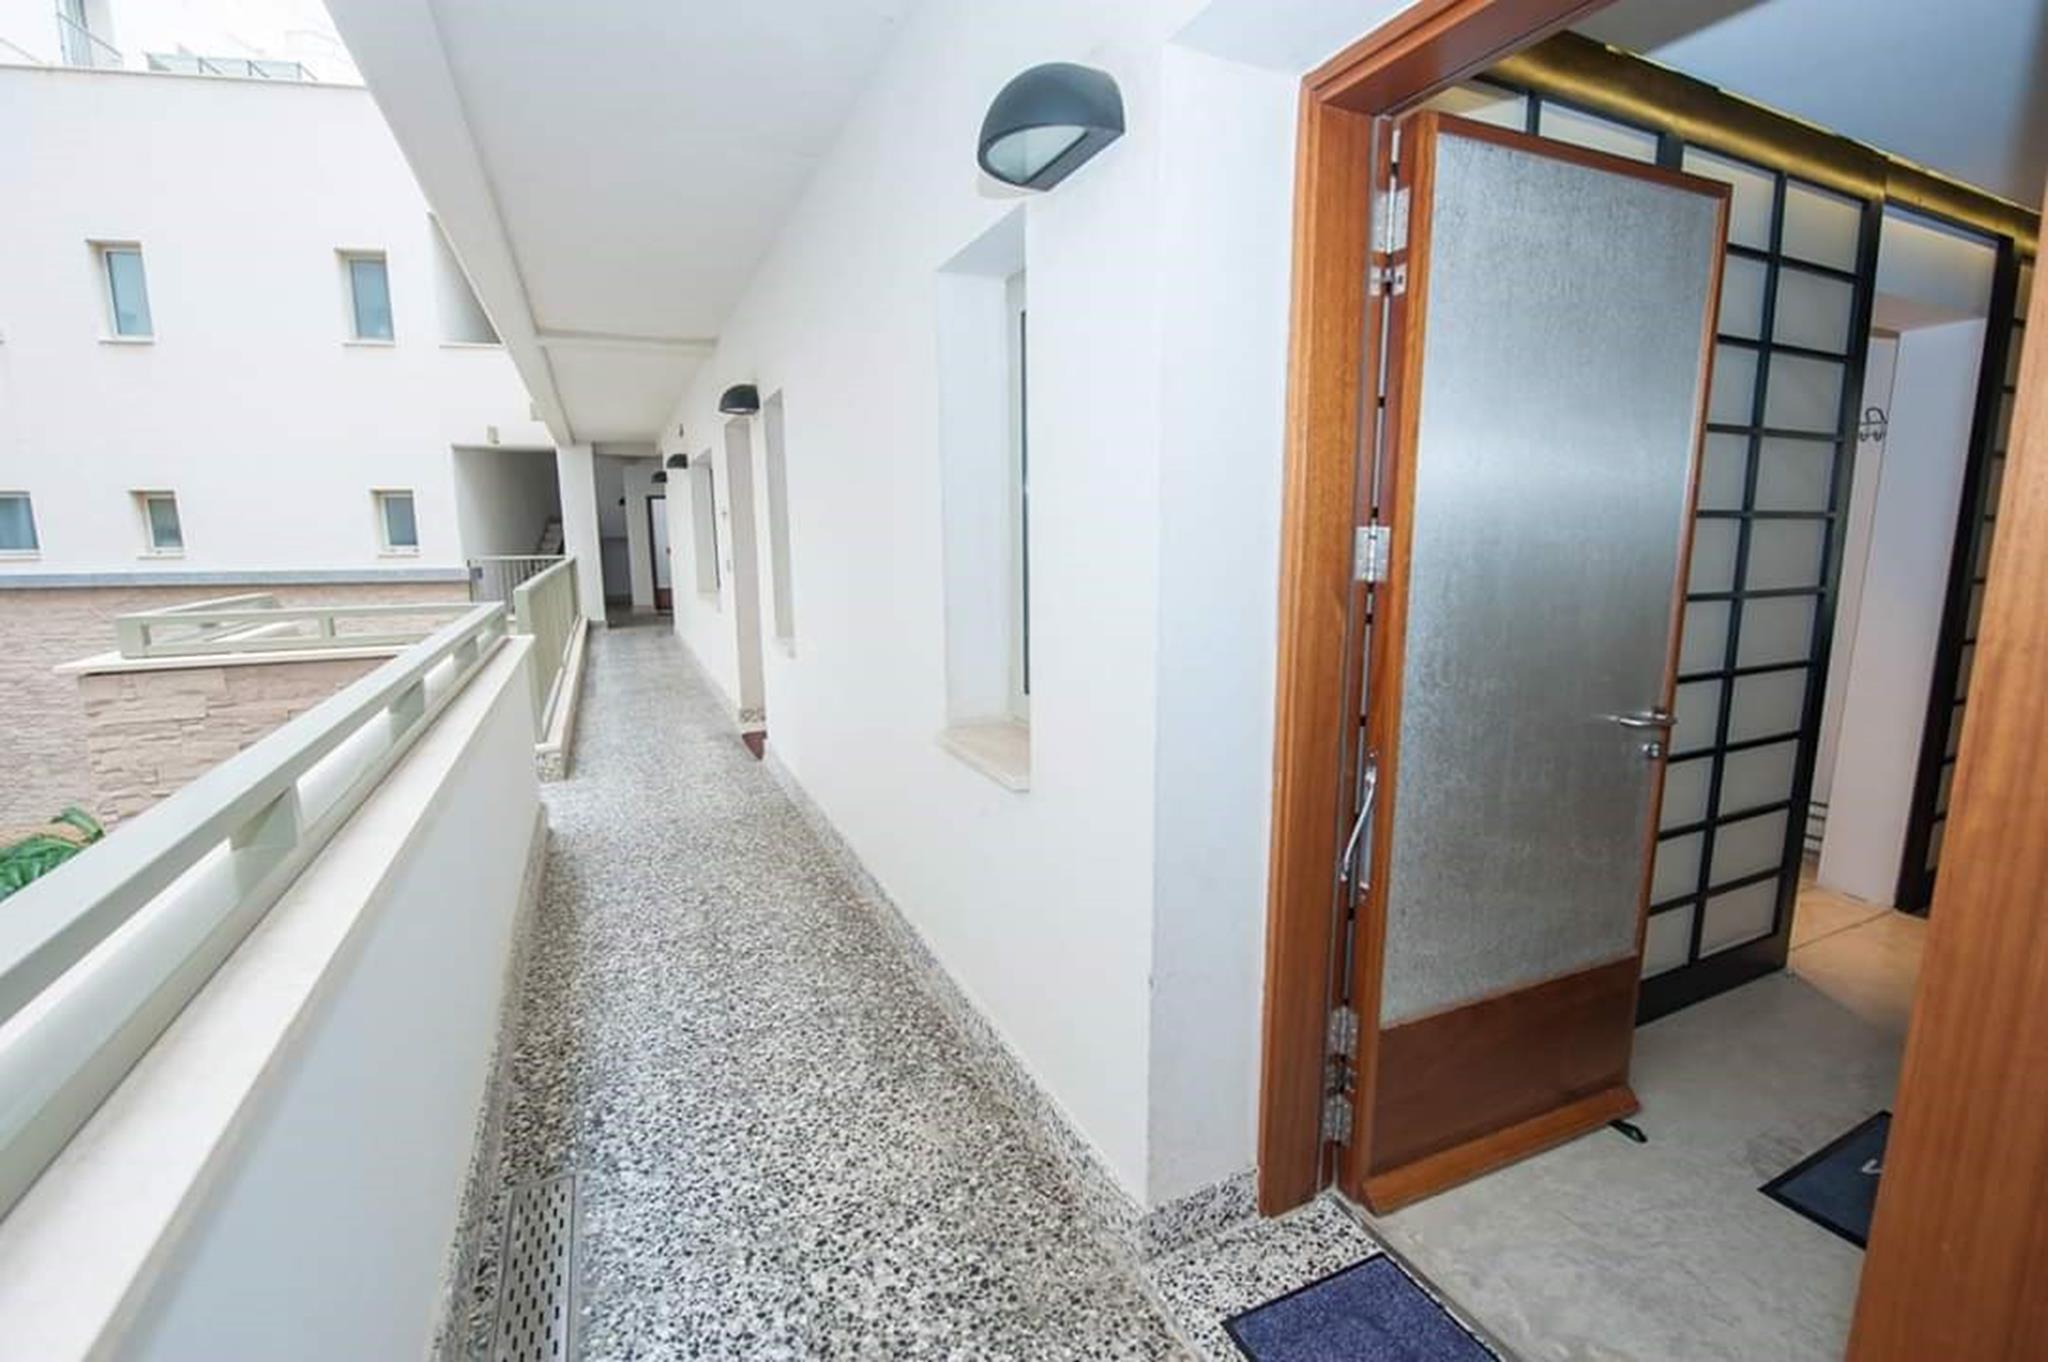 Tigne Point Terraced House - Ref No 001028 - Image 8